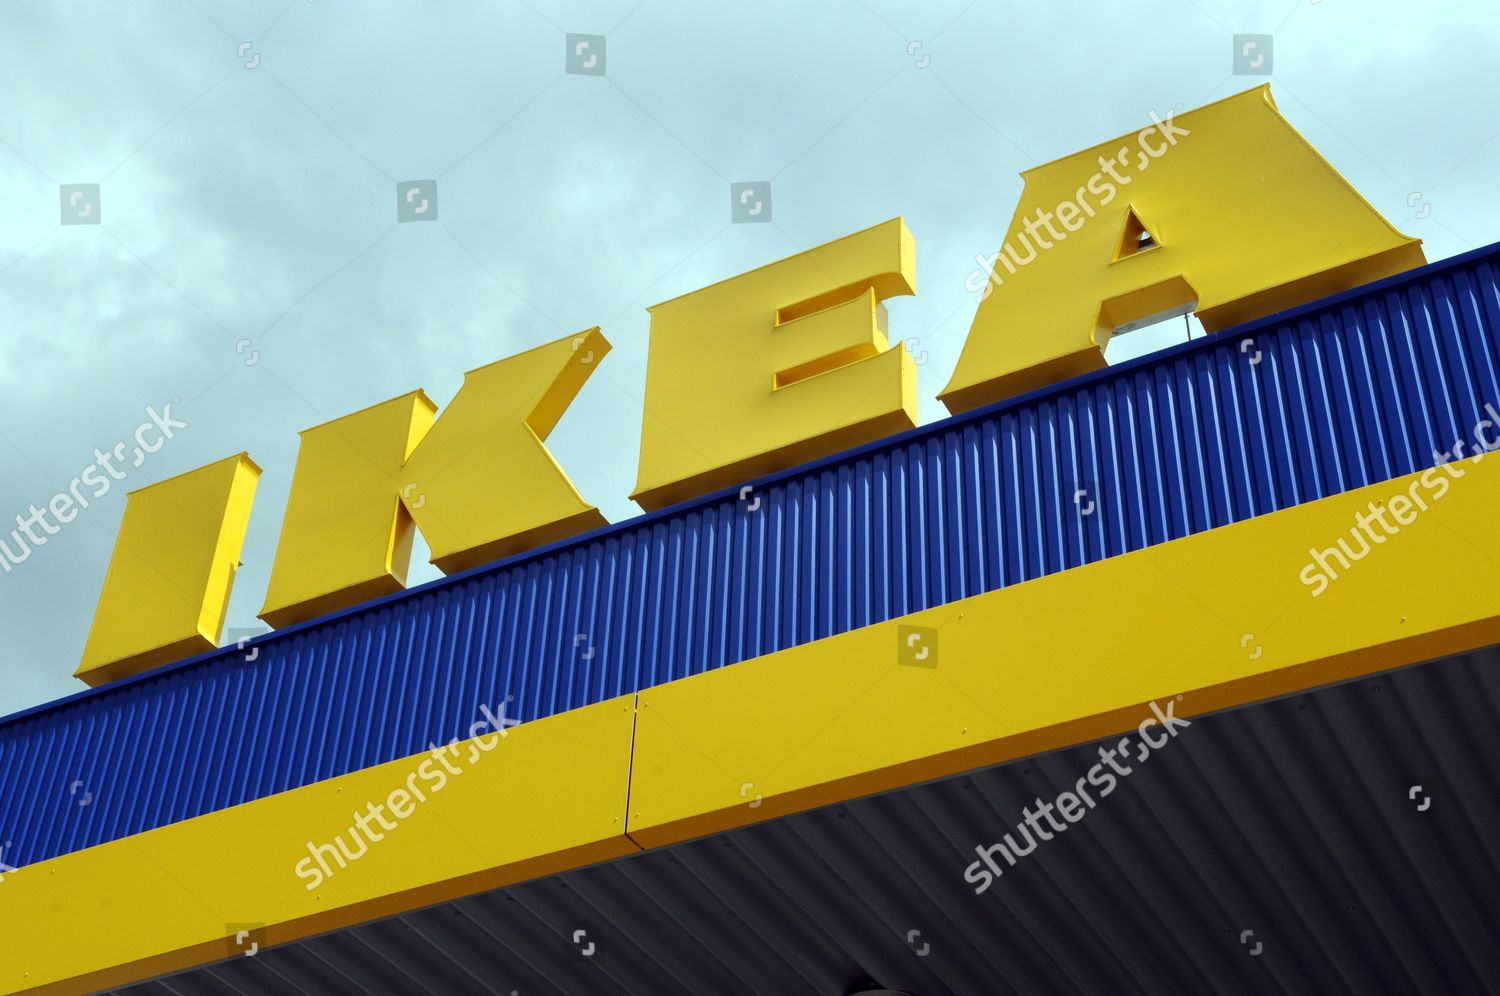 Image Showing Company Name Ikea Furniture Store Editorial Stock